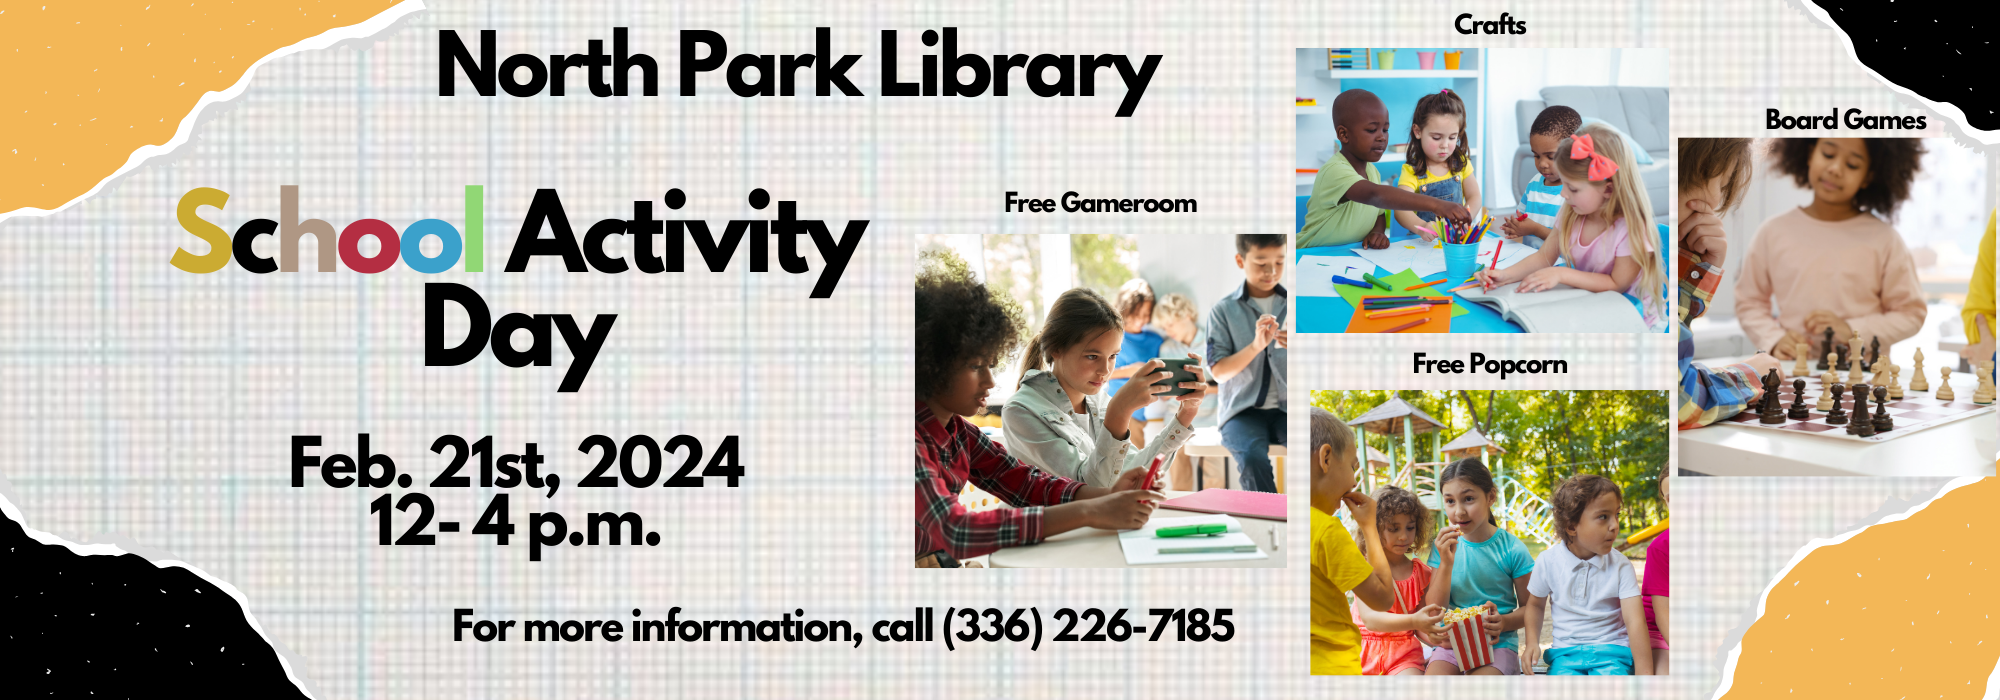 2.21 12-8 pm – School Activity Day at North Park